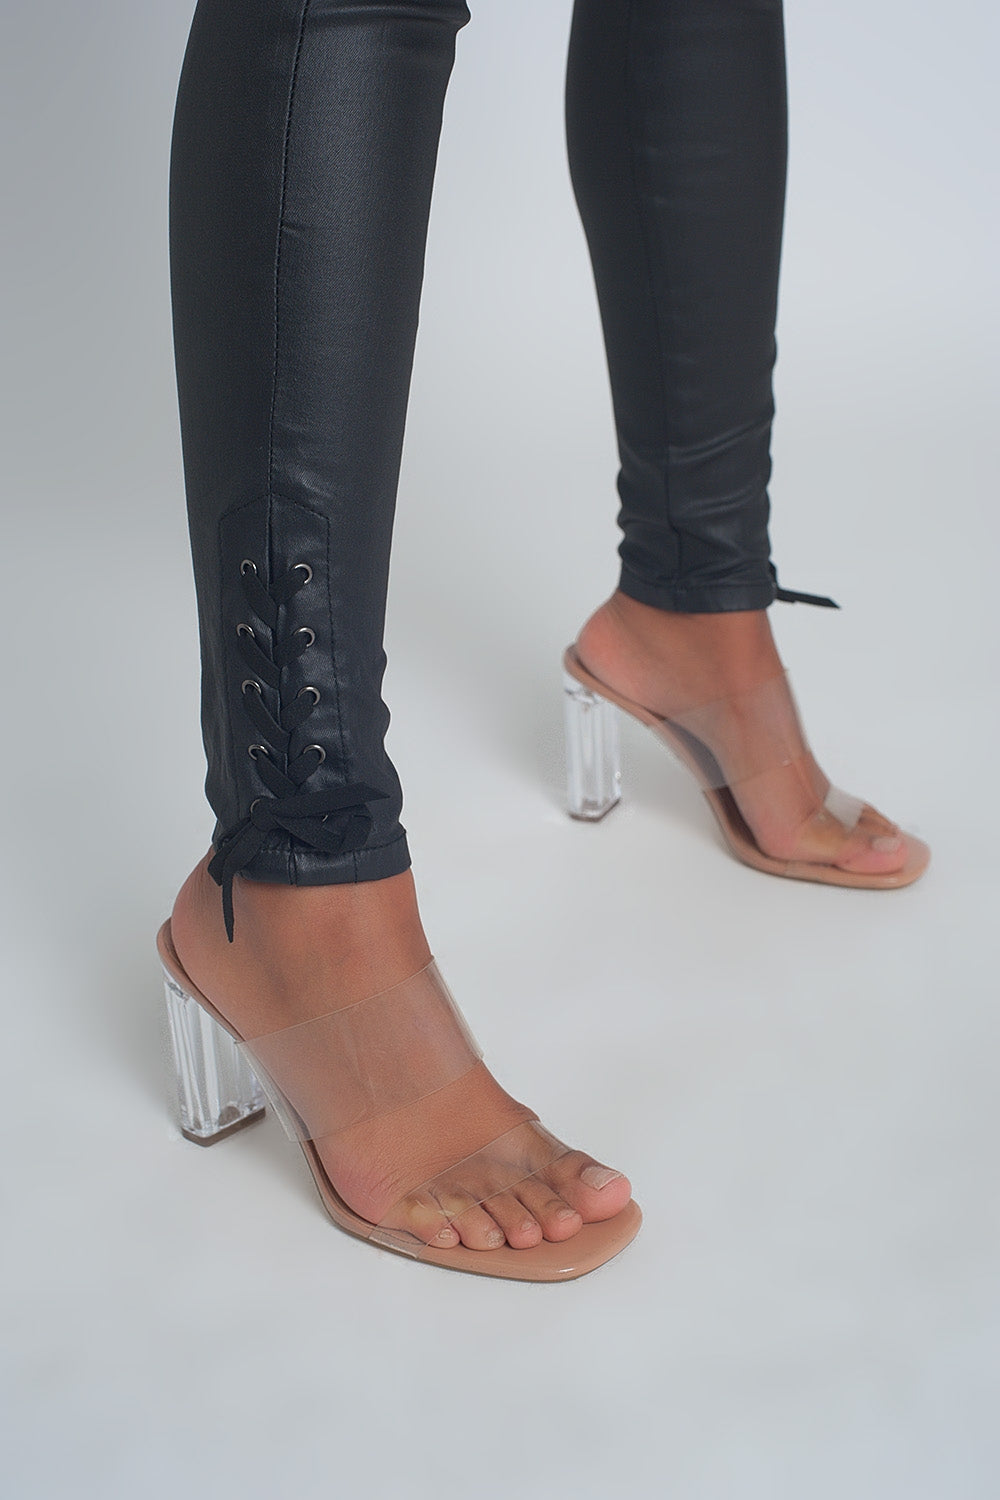 Black Leather Effect Trousers With Hem Lace-Up